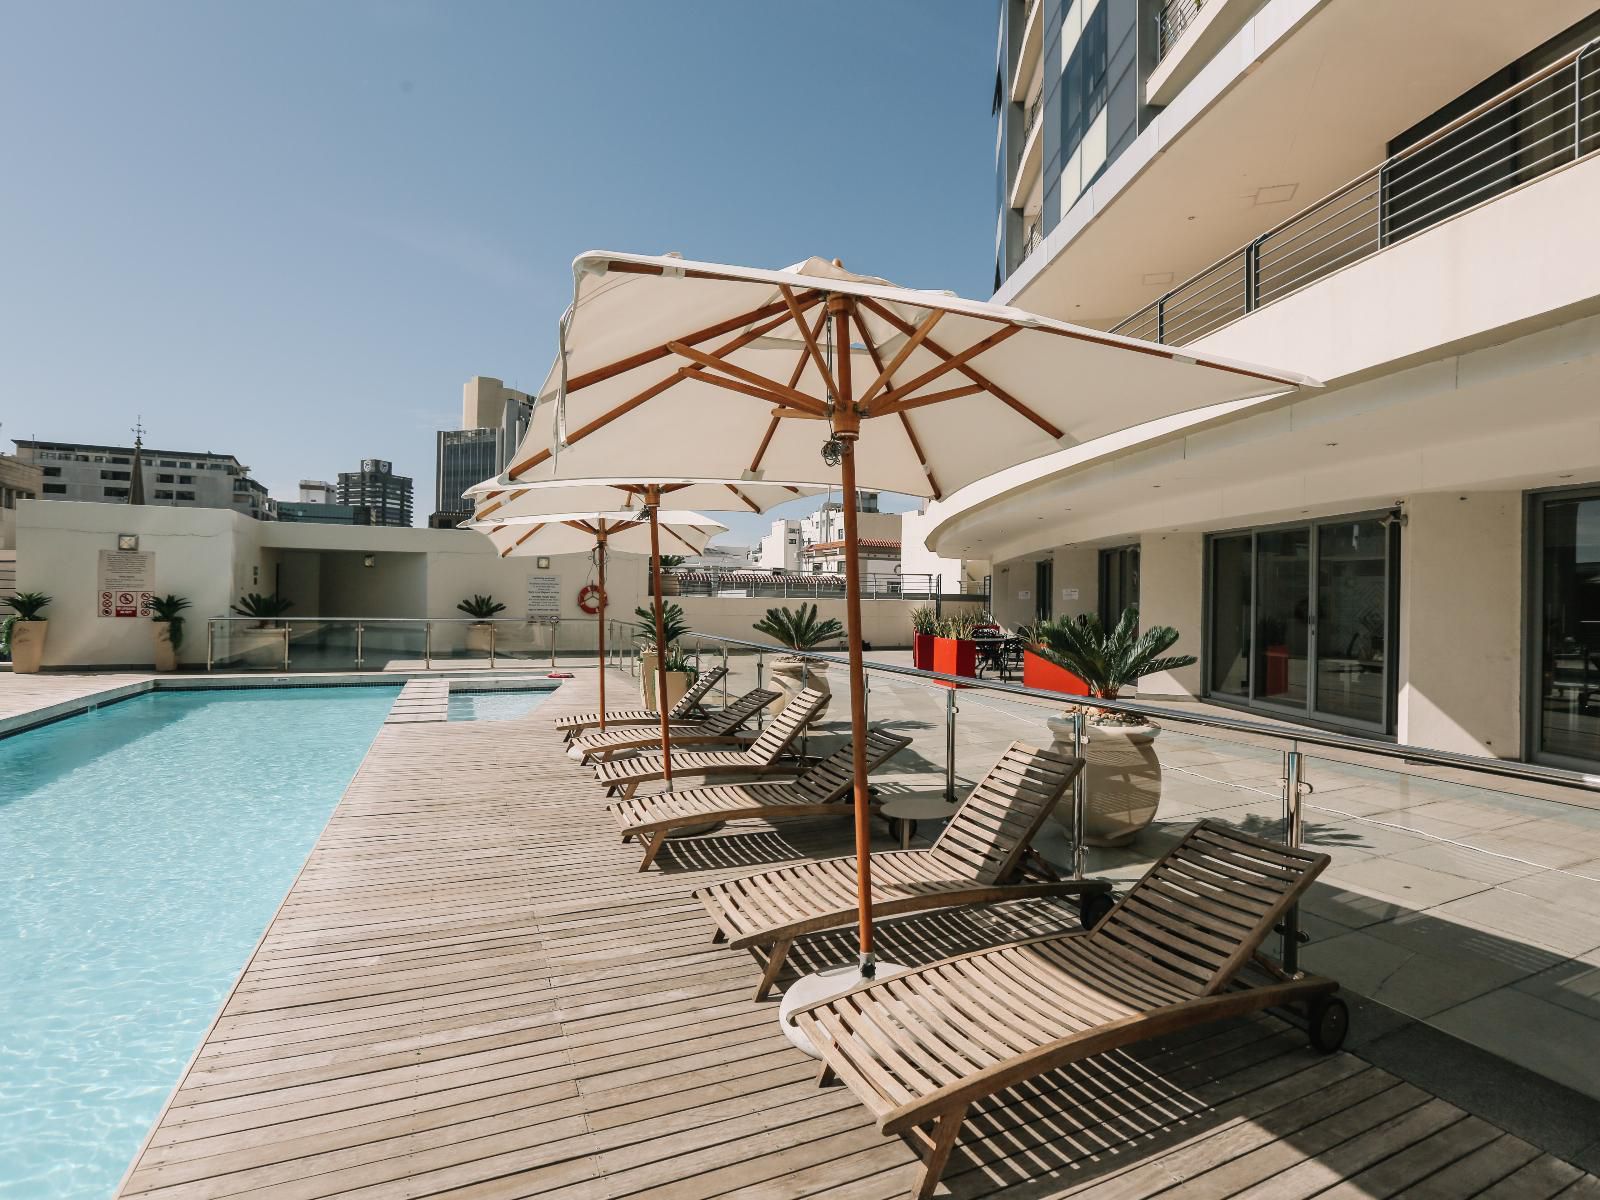 Mandela Rhodes Place Suite Hotel Cape Town City Centre Cape Town Western Cape South Africa Balcony, Architecture, Swimming Pool